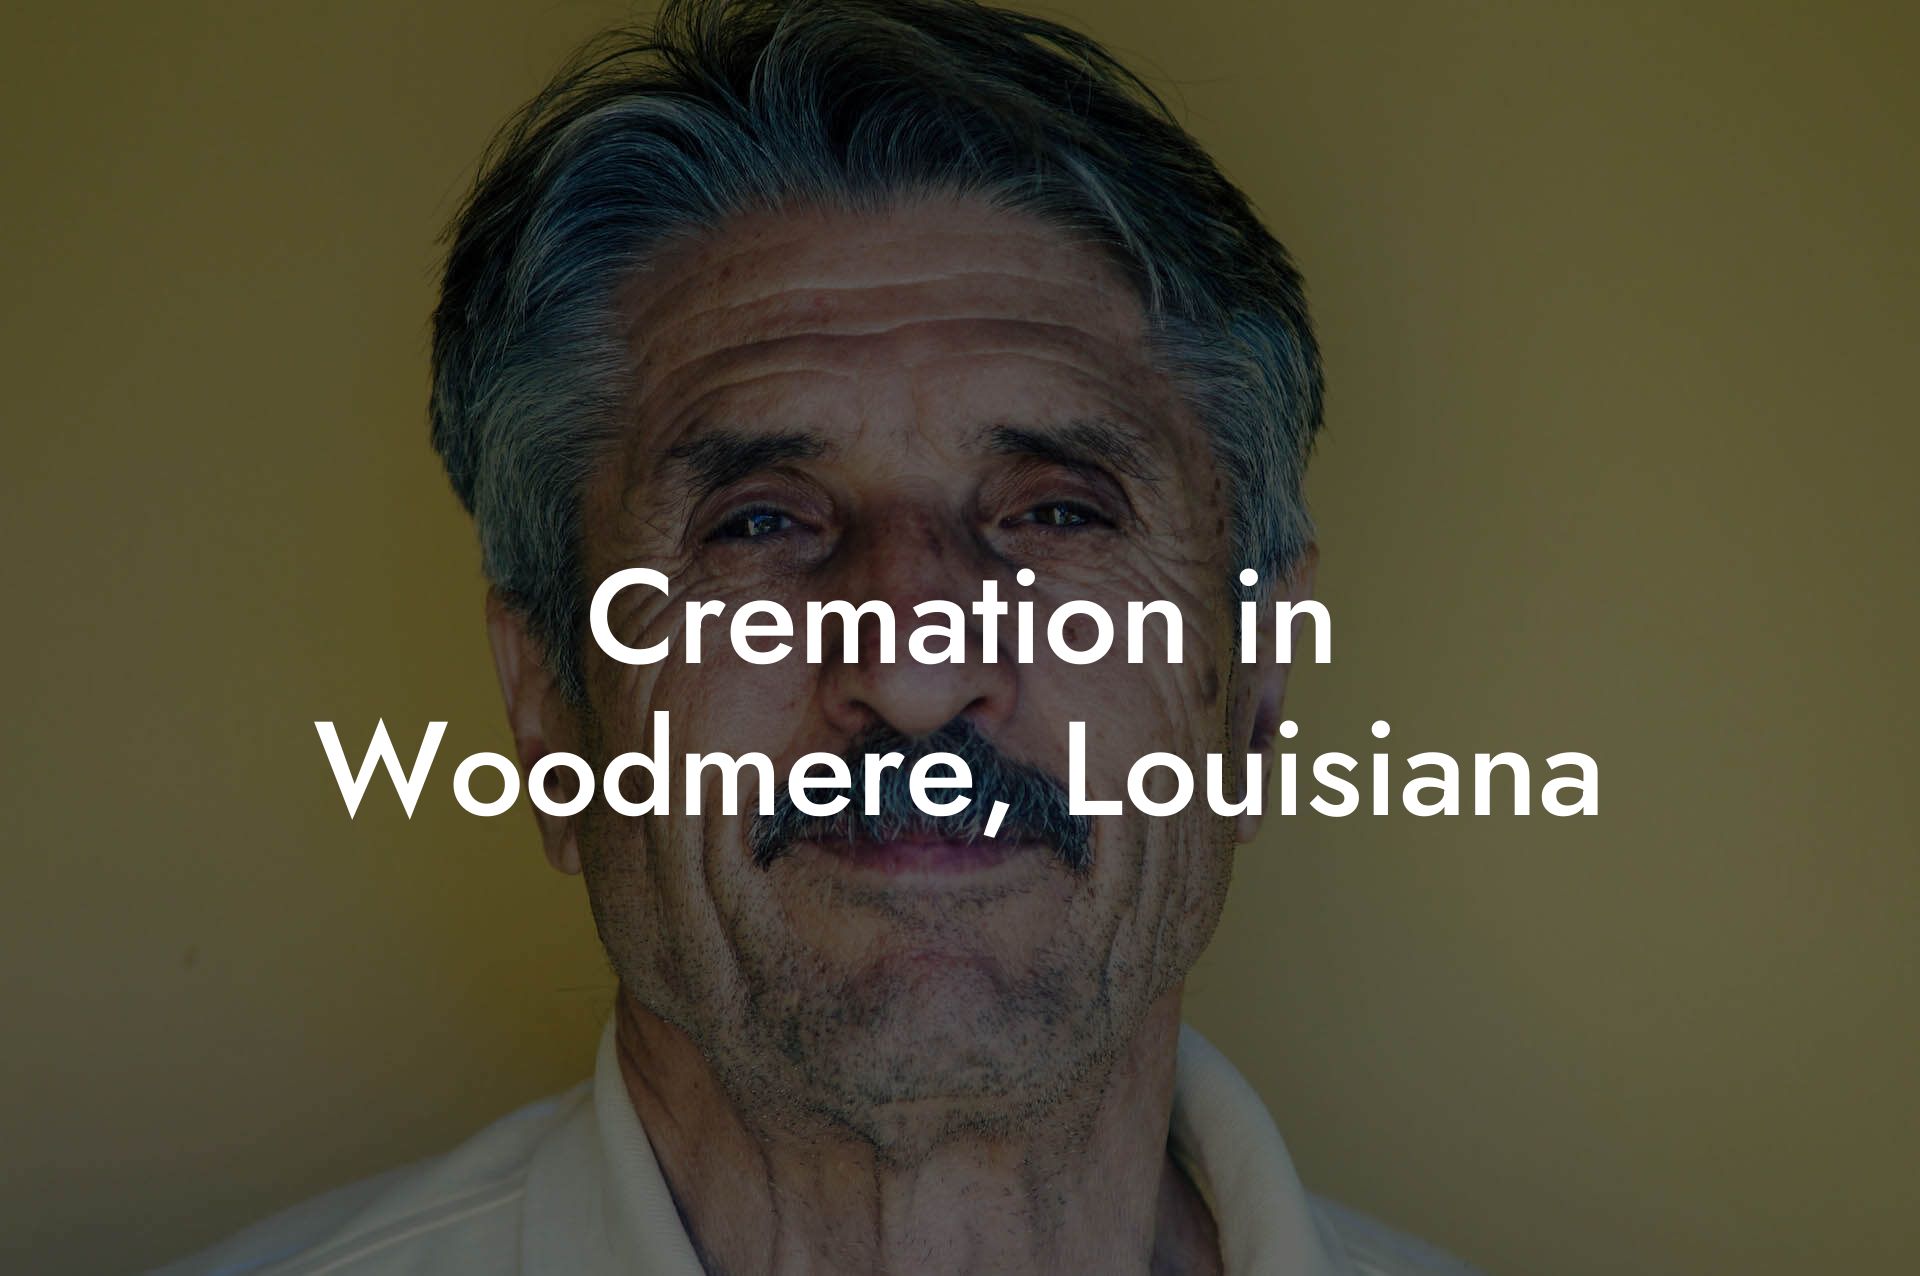 Cremation in Woodmere, Louisiana